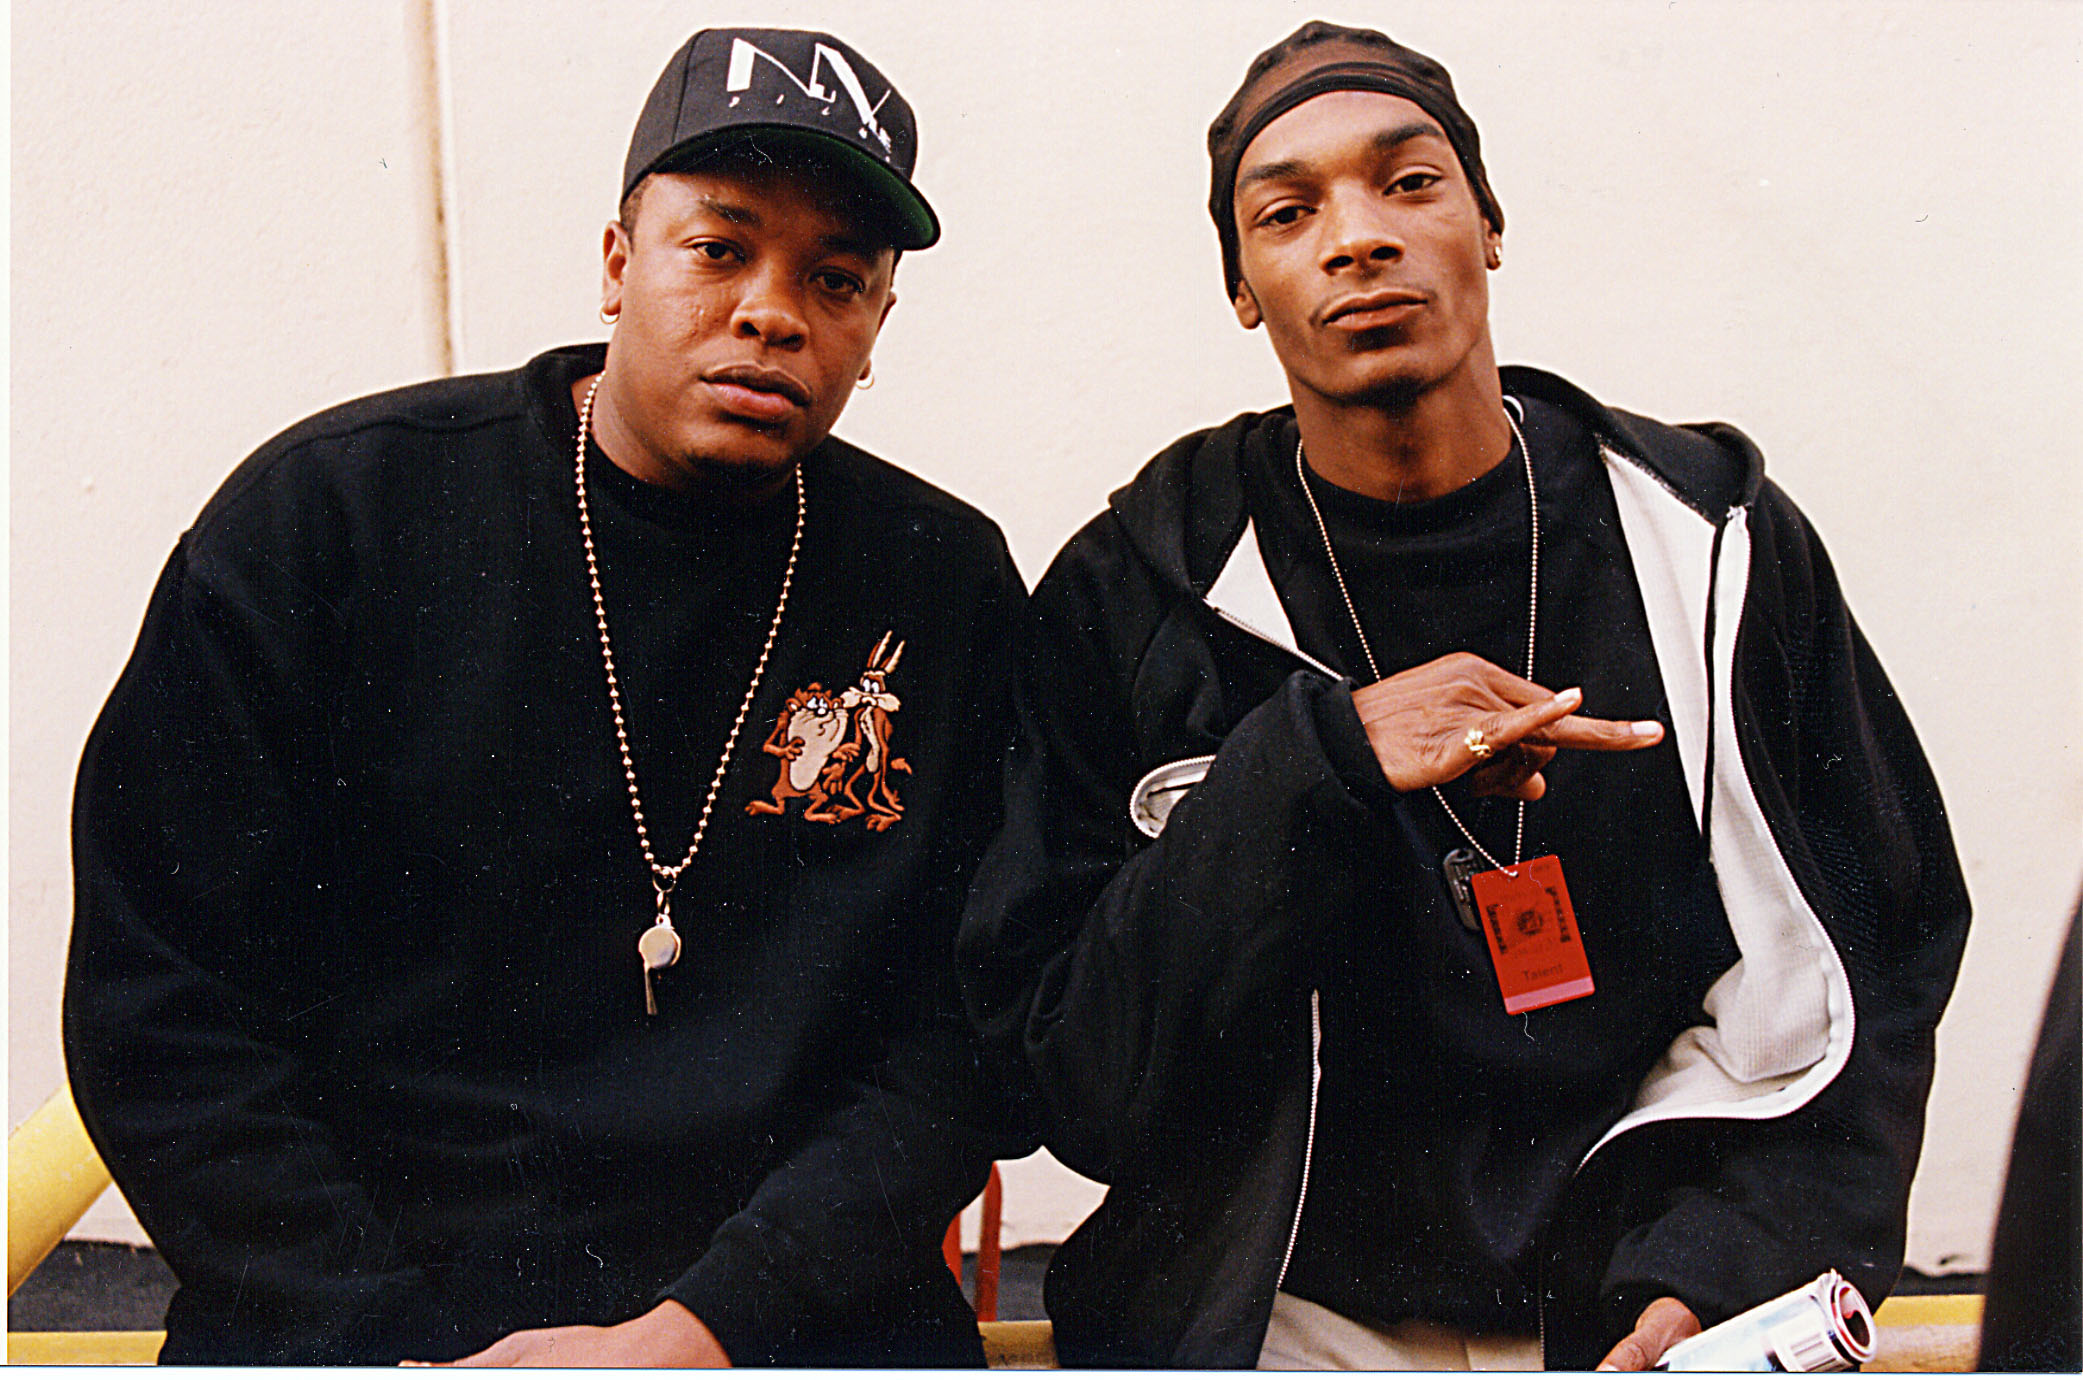 Is Dr Dre richer than Snoop Dogg?